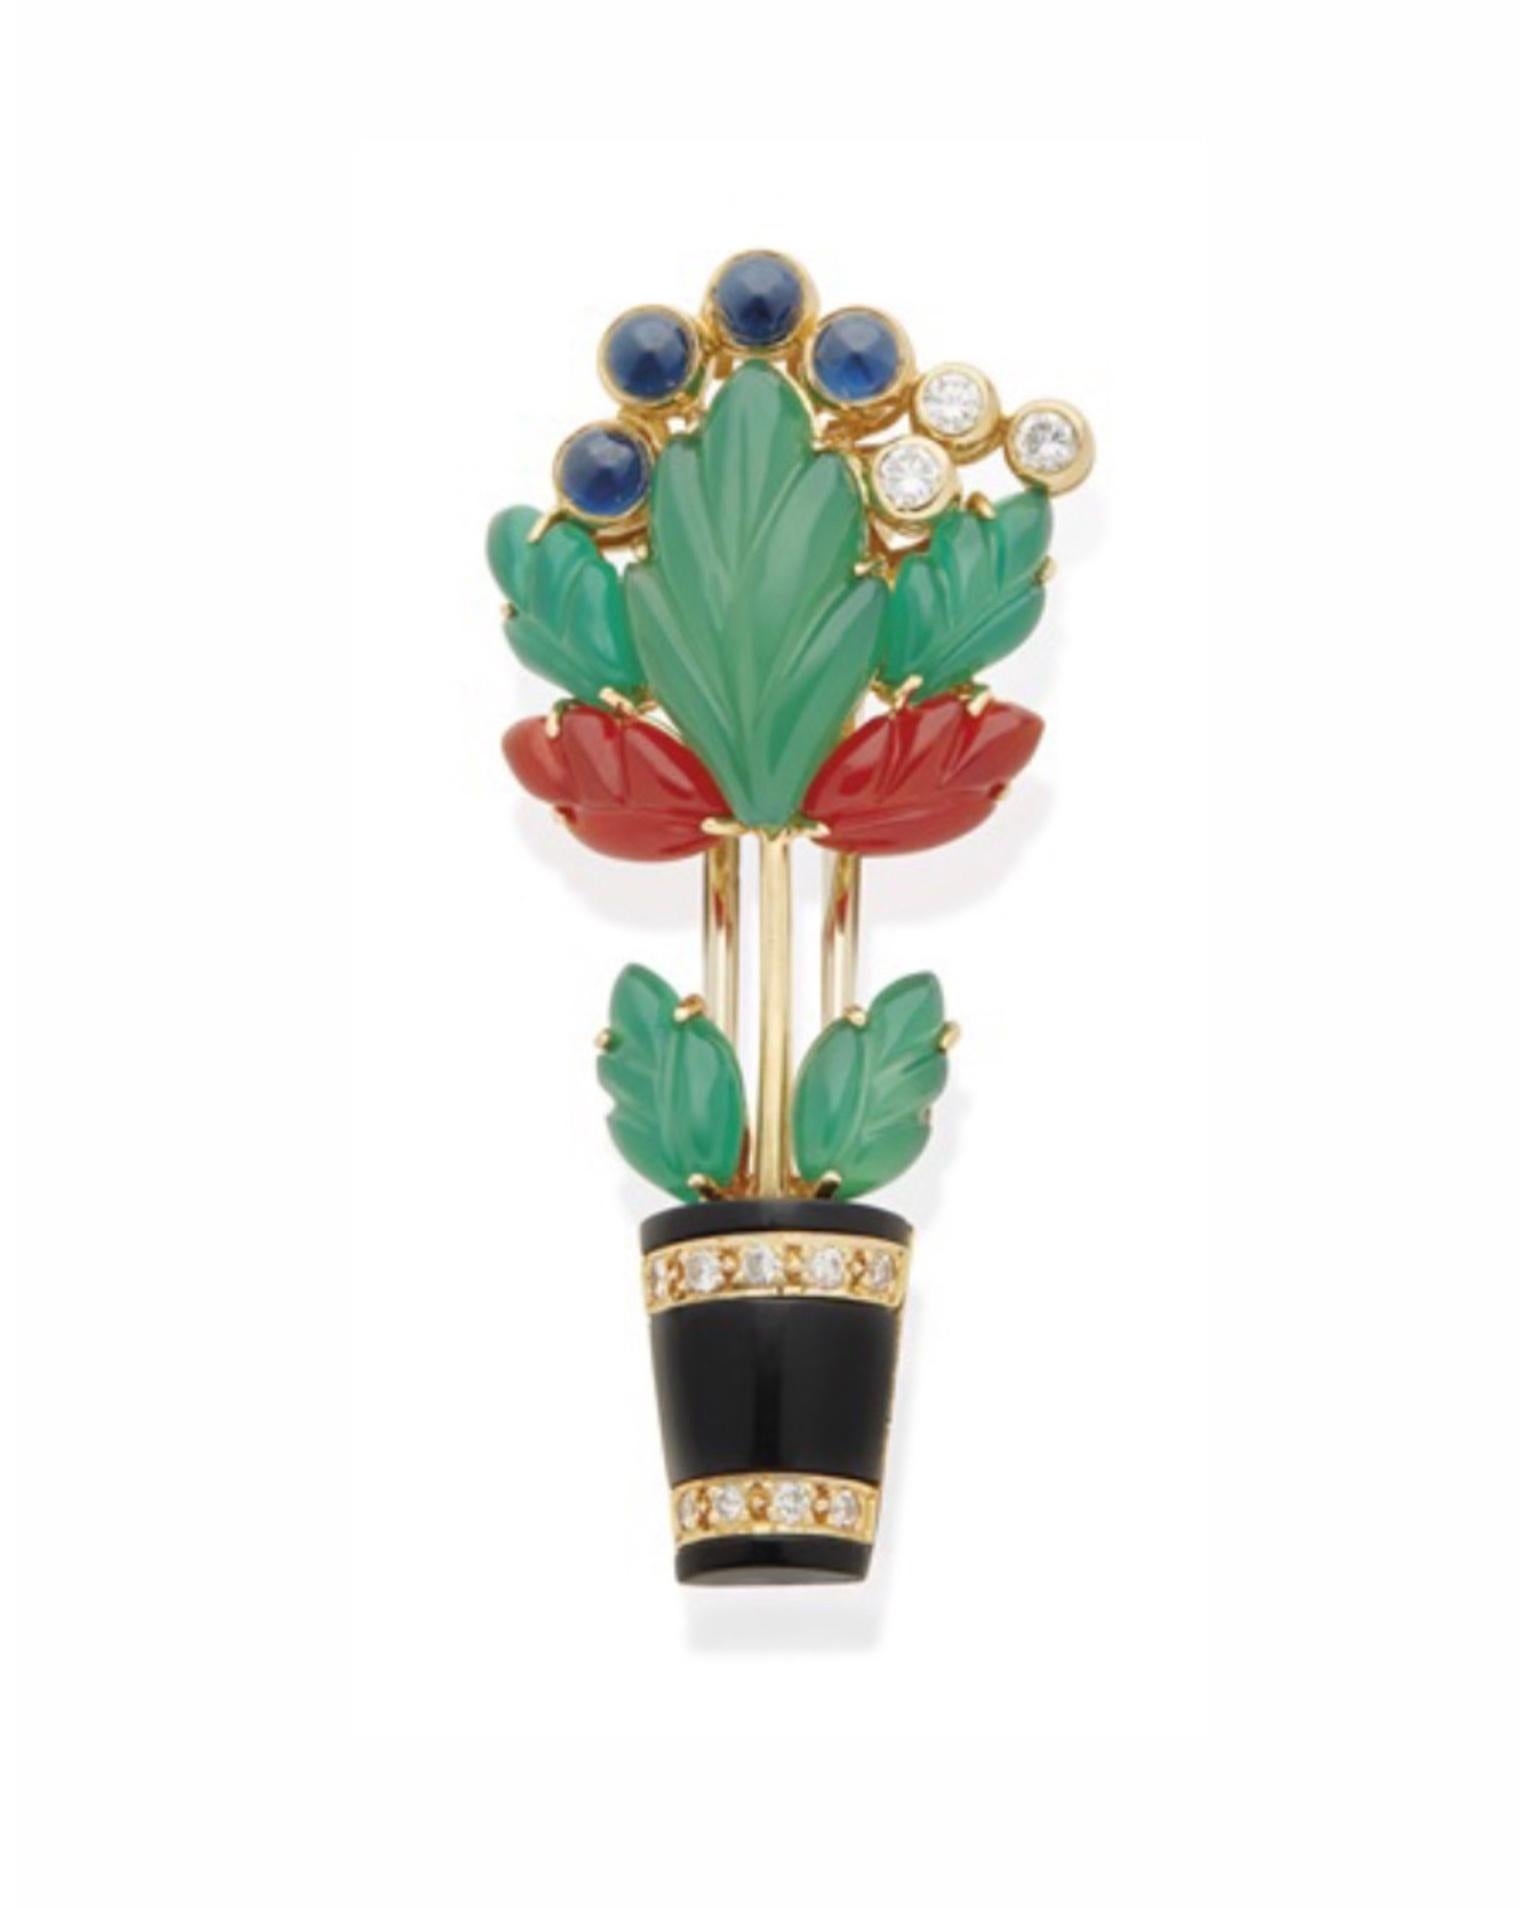 Cartier flowering vase brooch in 18kt yellow gold with onyx, dyed green chalcedony and carnelian, cabochon sapphires and brilliant-cut diamonds. Circa 1989.
Measures 4.4 x 2 cm. (1.7 x 0.8 in.)